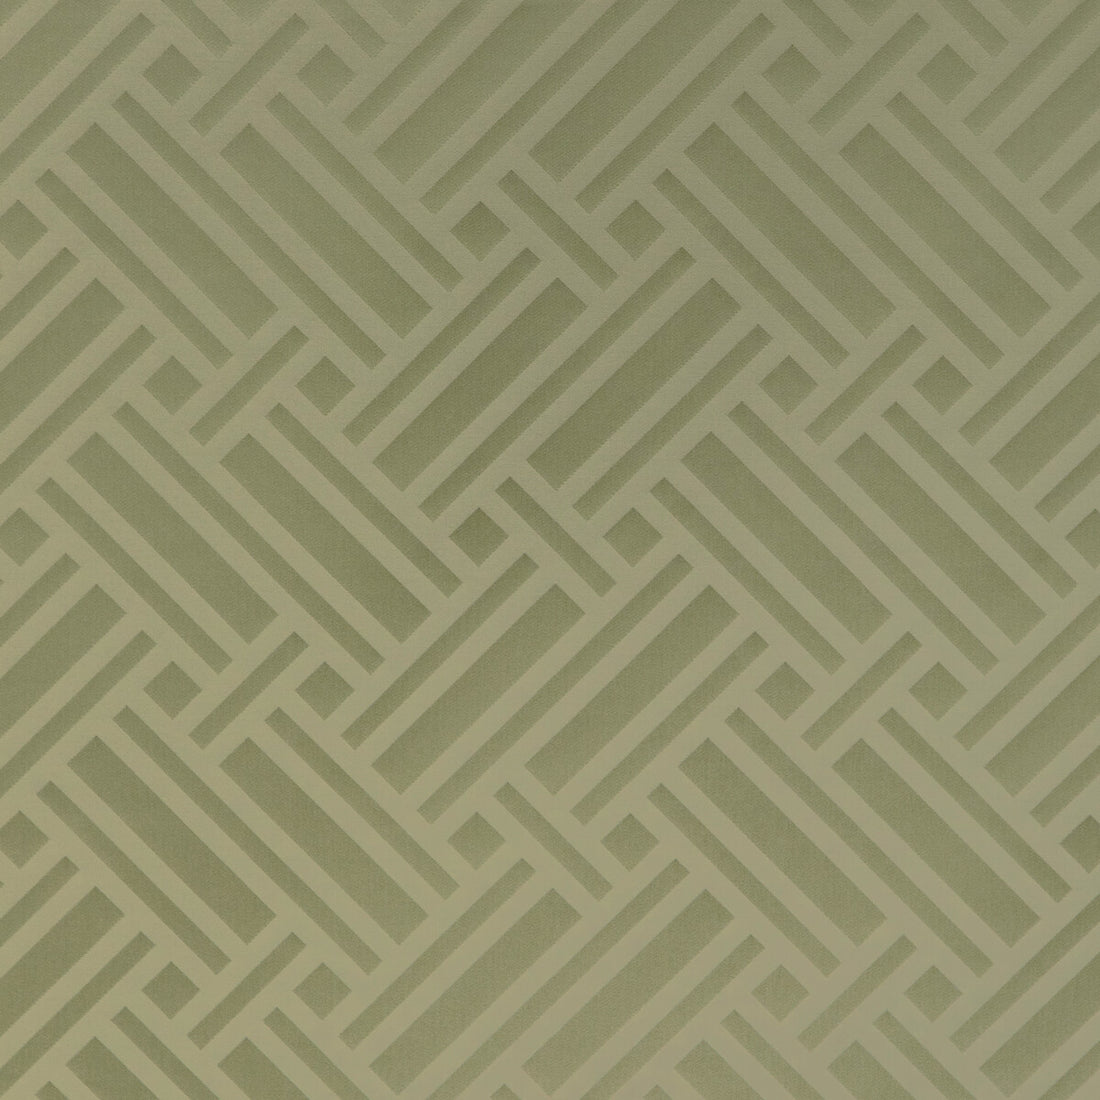 Martel Weave fabric in leaf color - pattern 8023144.3.0 - by Brunschwig &amp; Fils in the Vienne Silks collection